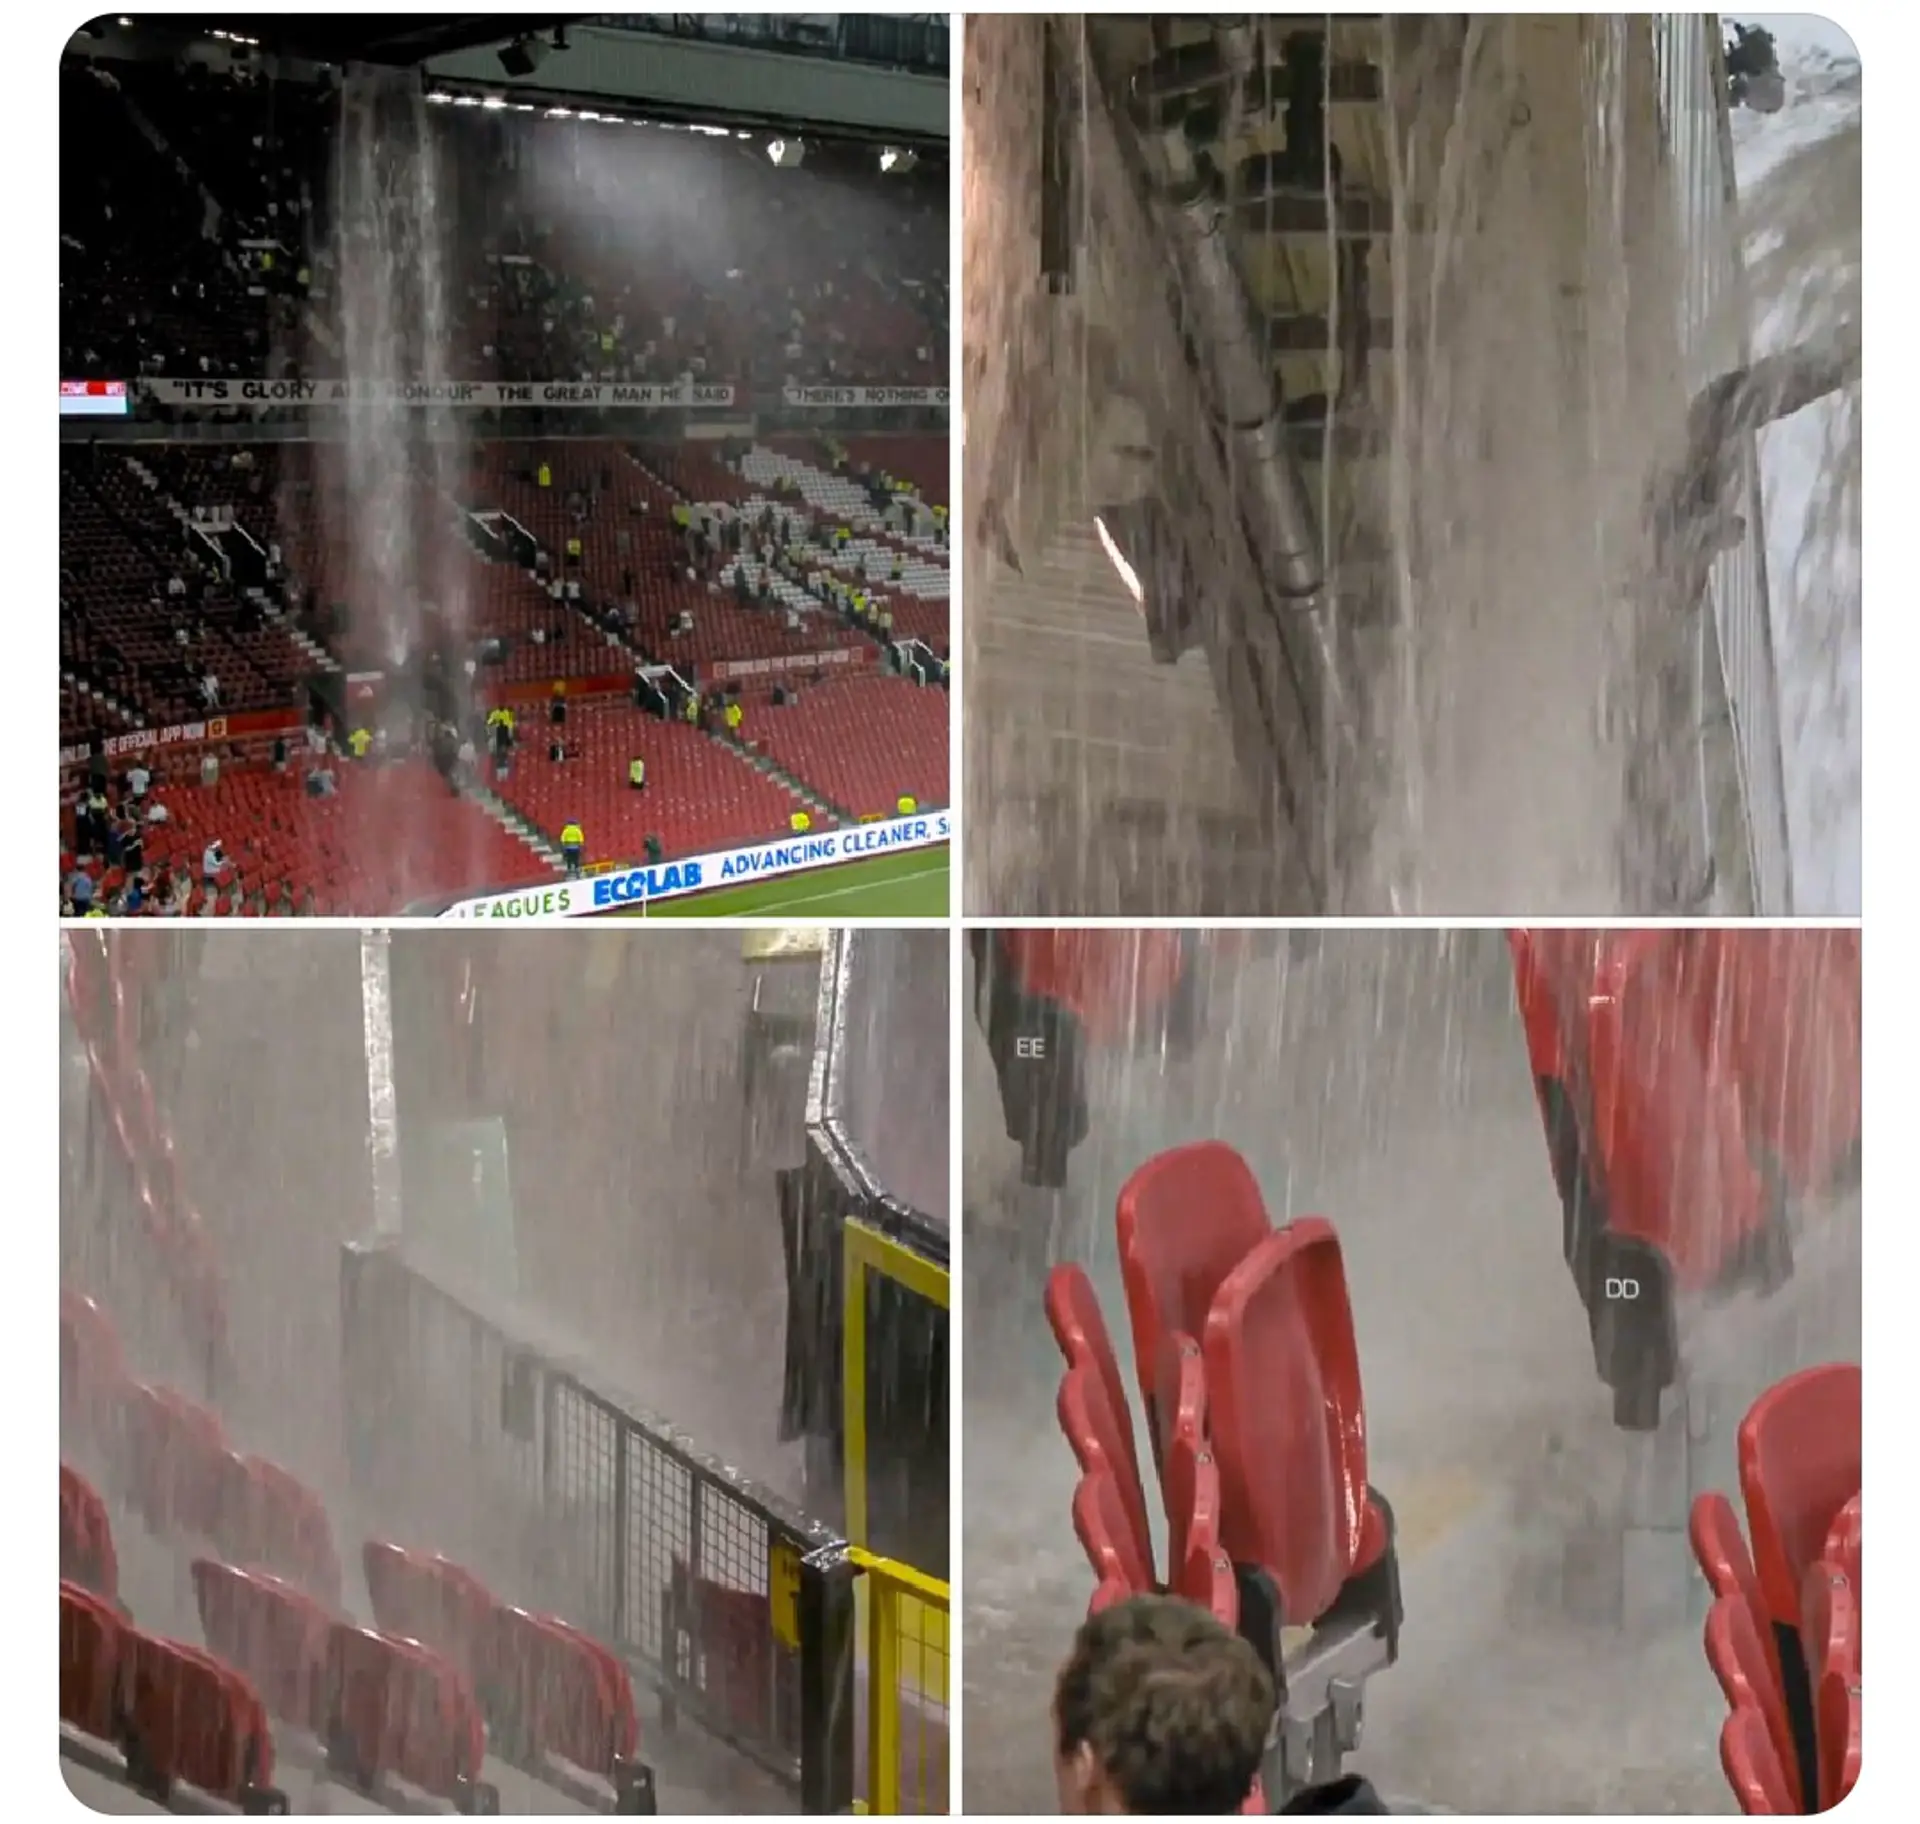 After all these if you still pay Glazers & Co under this waterfall... you are not smart #EmptyOldTrafford #GlazersOut